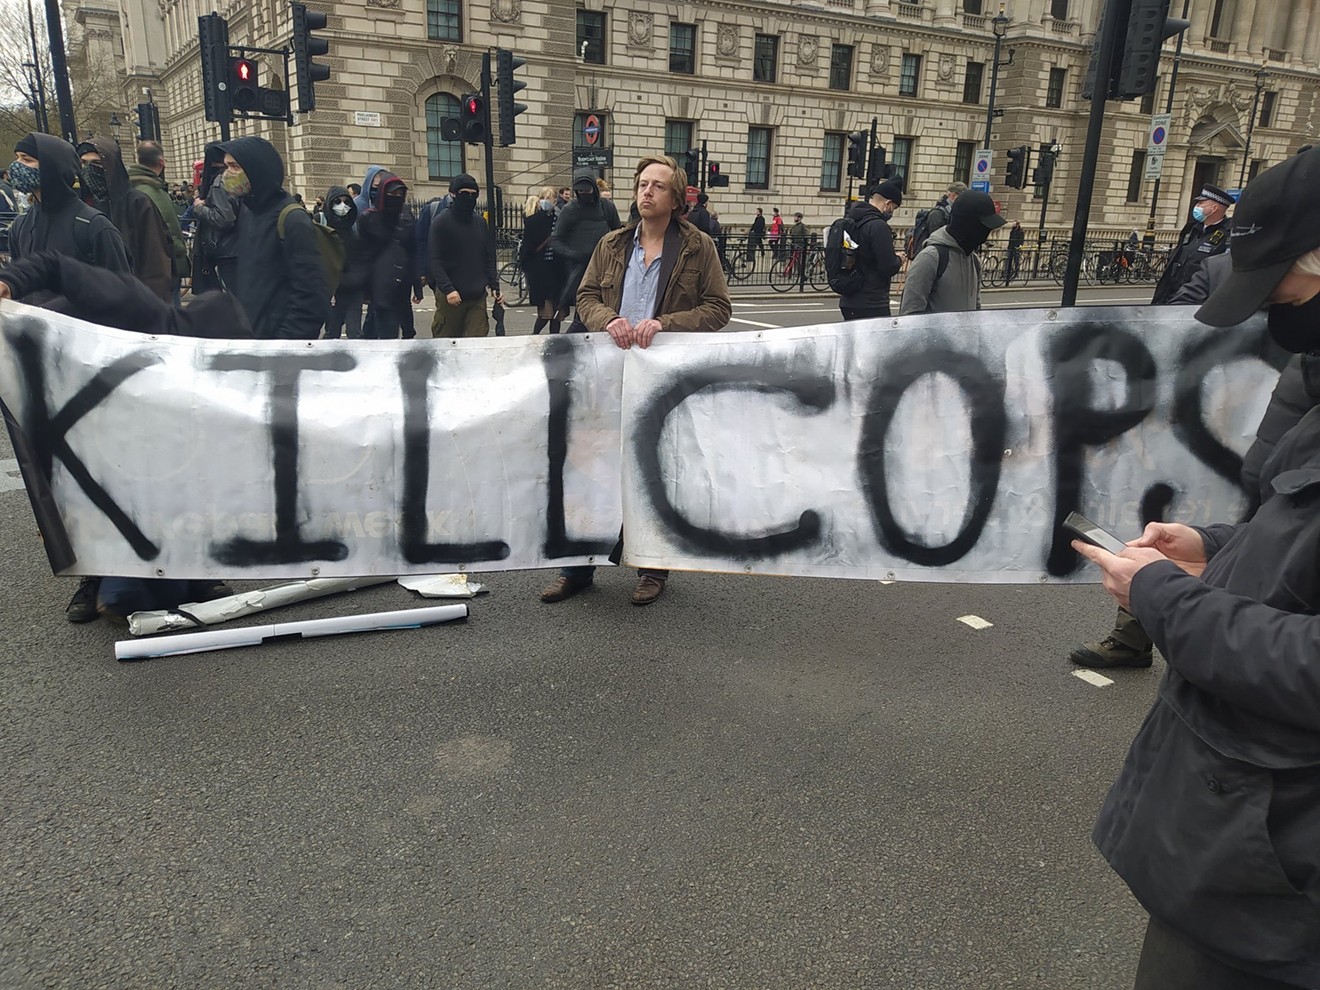 Barrett Brown holds the "Kill Cops" sign at a London protest against a new crime bill.